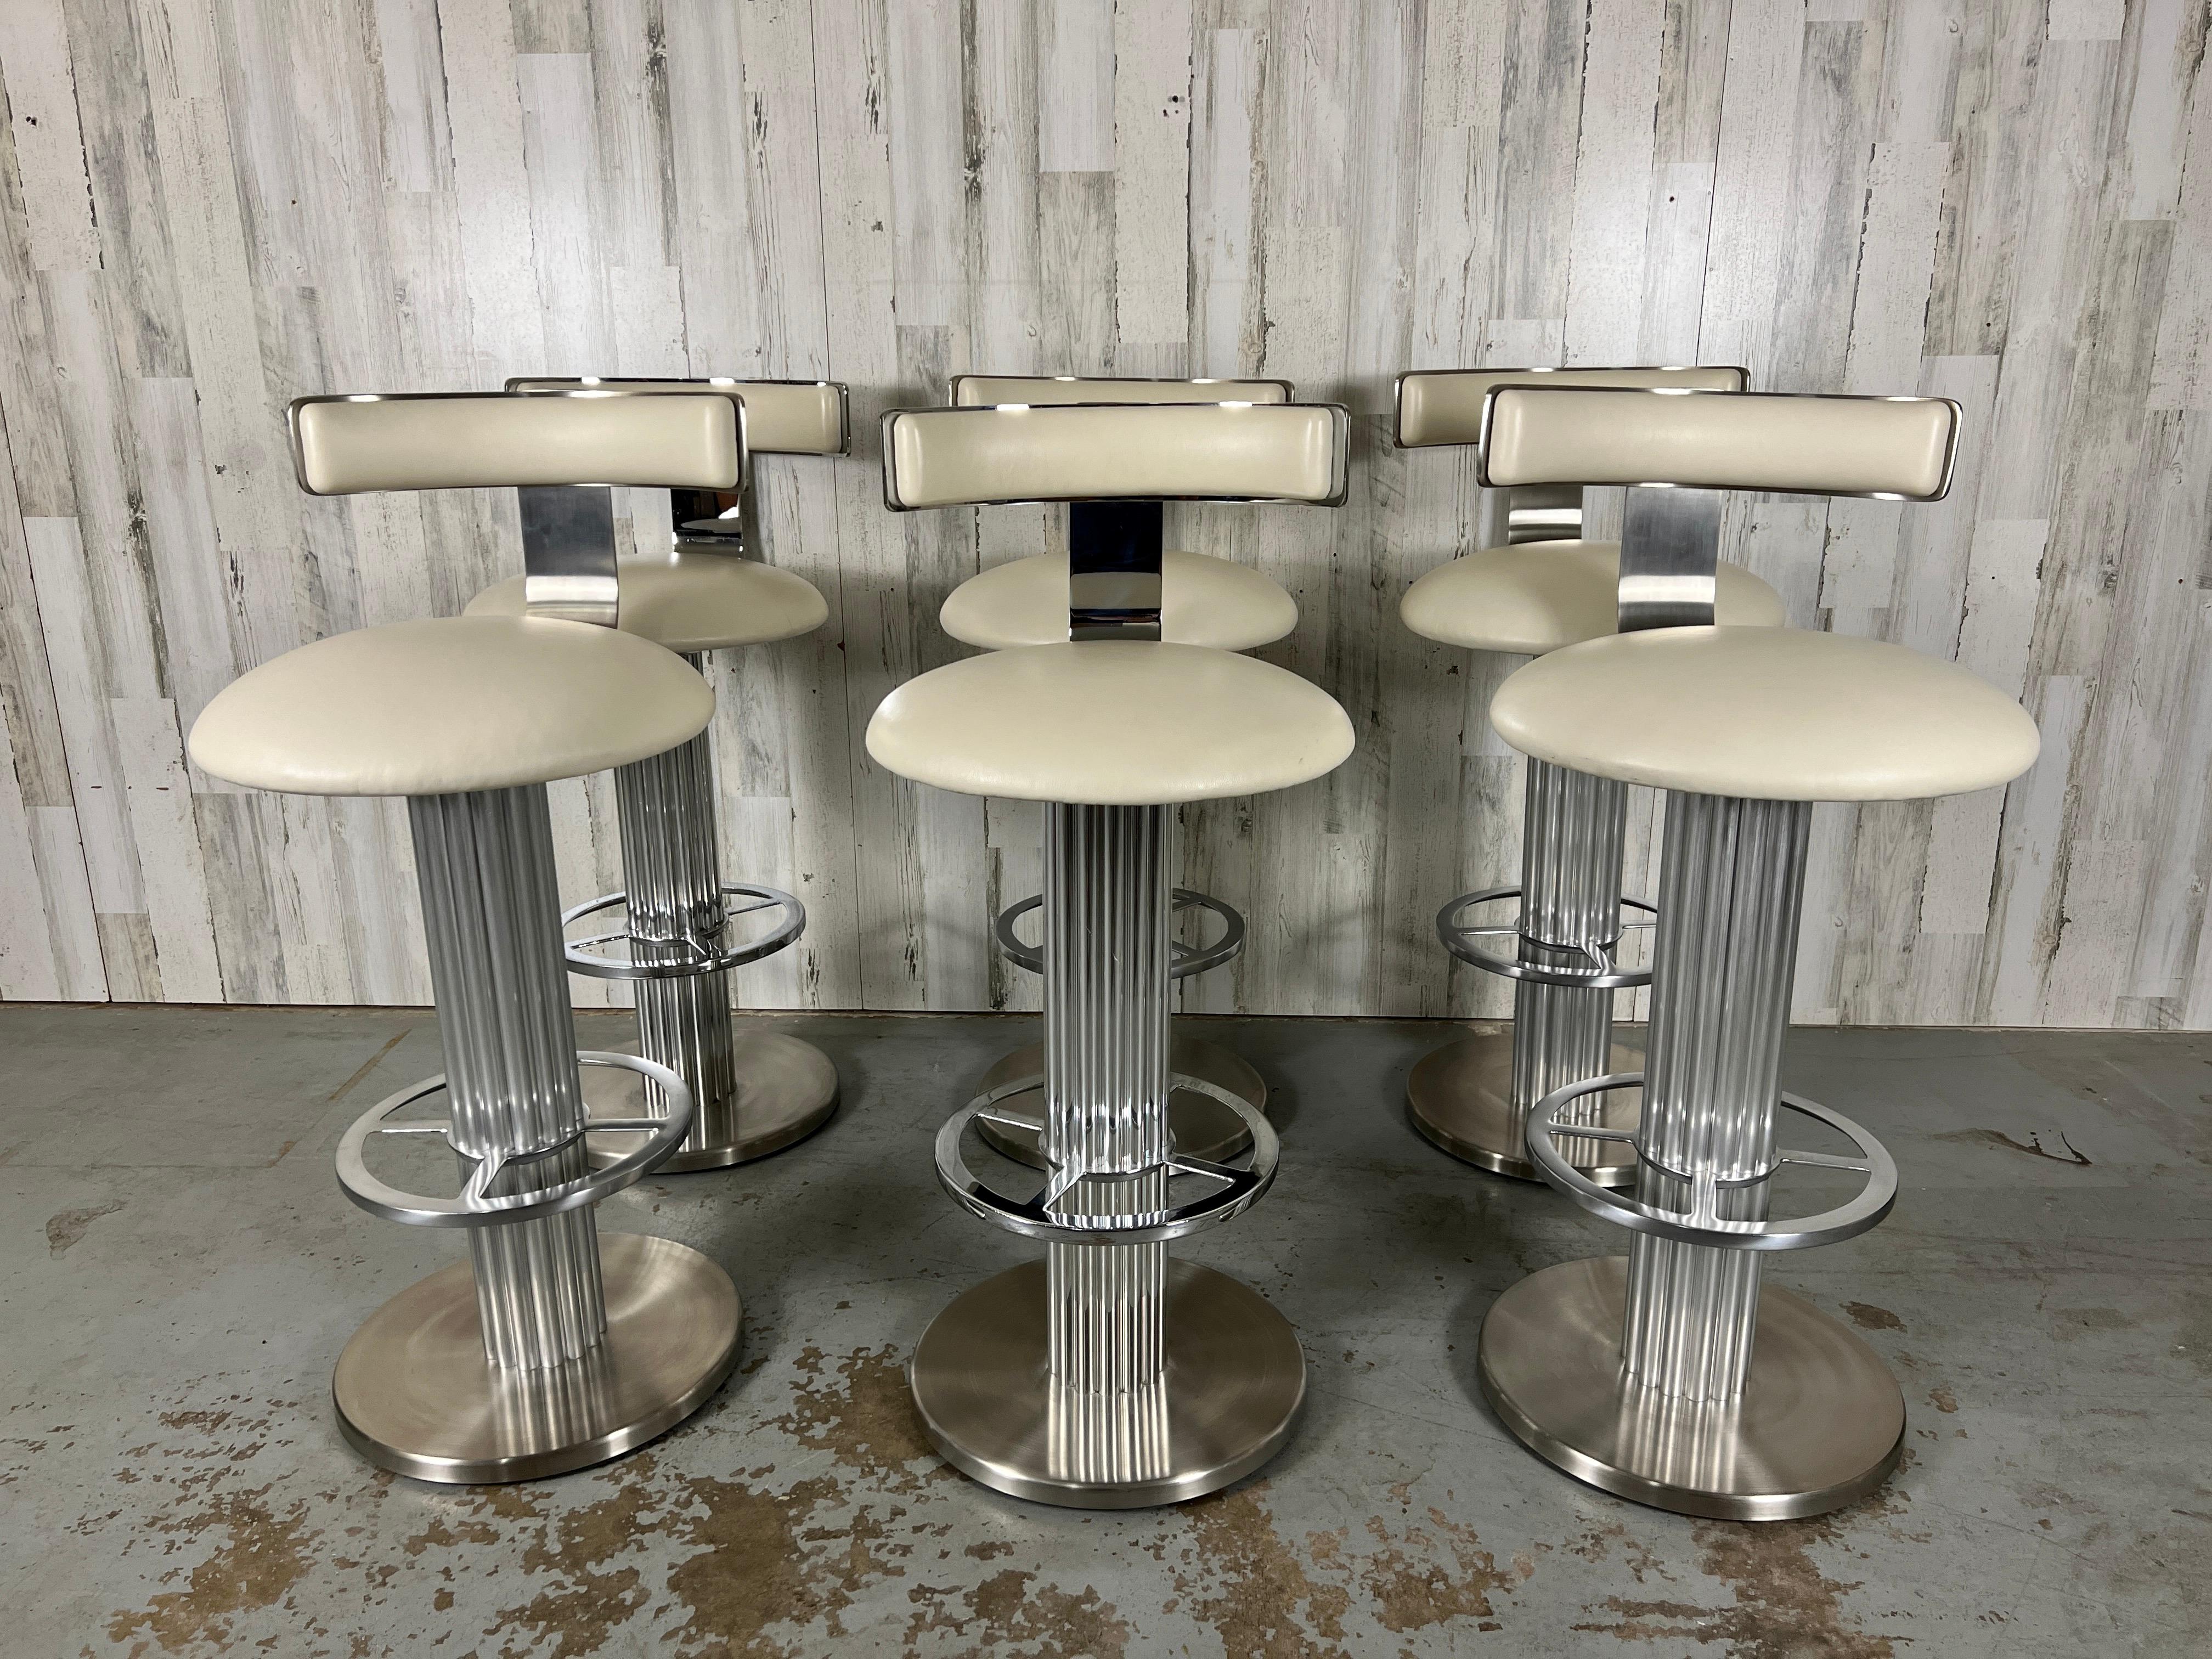 Design for Leisure brushed stainless steel swivel bar stools- set of 6. Very high quality metal & original off white leather upholstery make these stools look very luxurious.